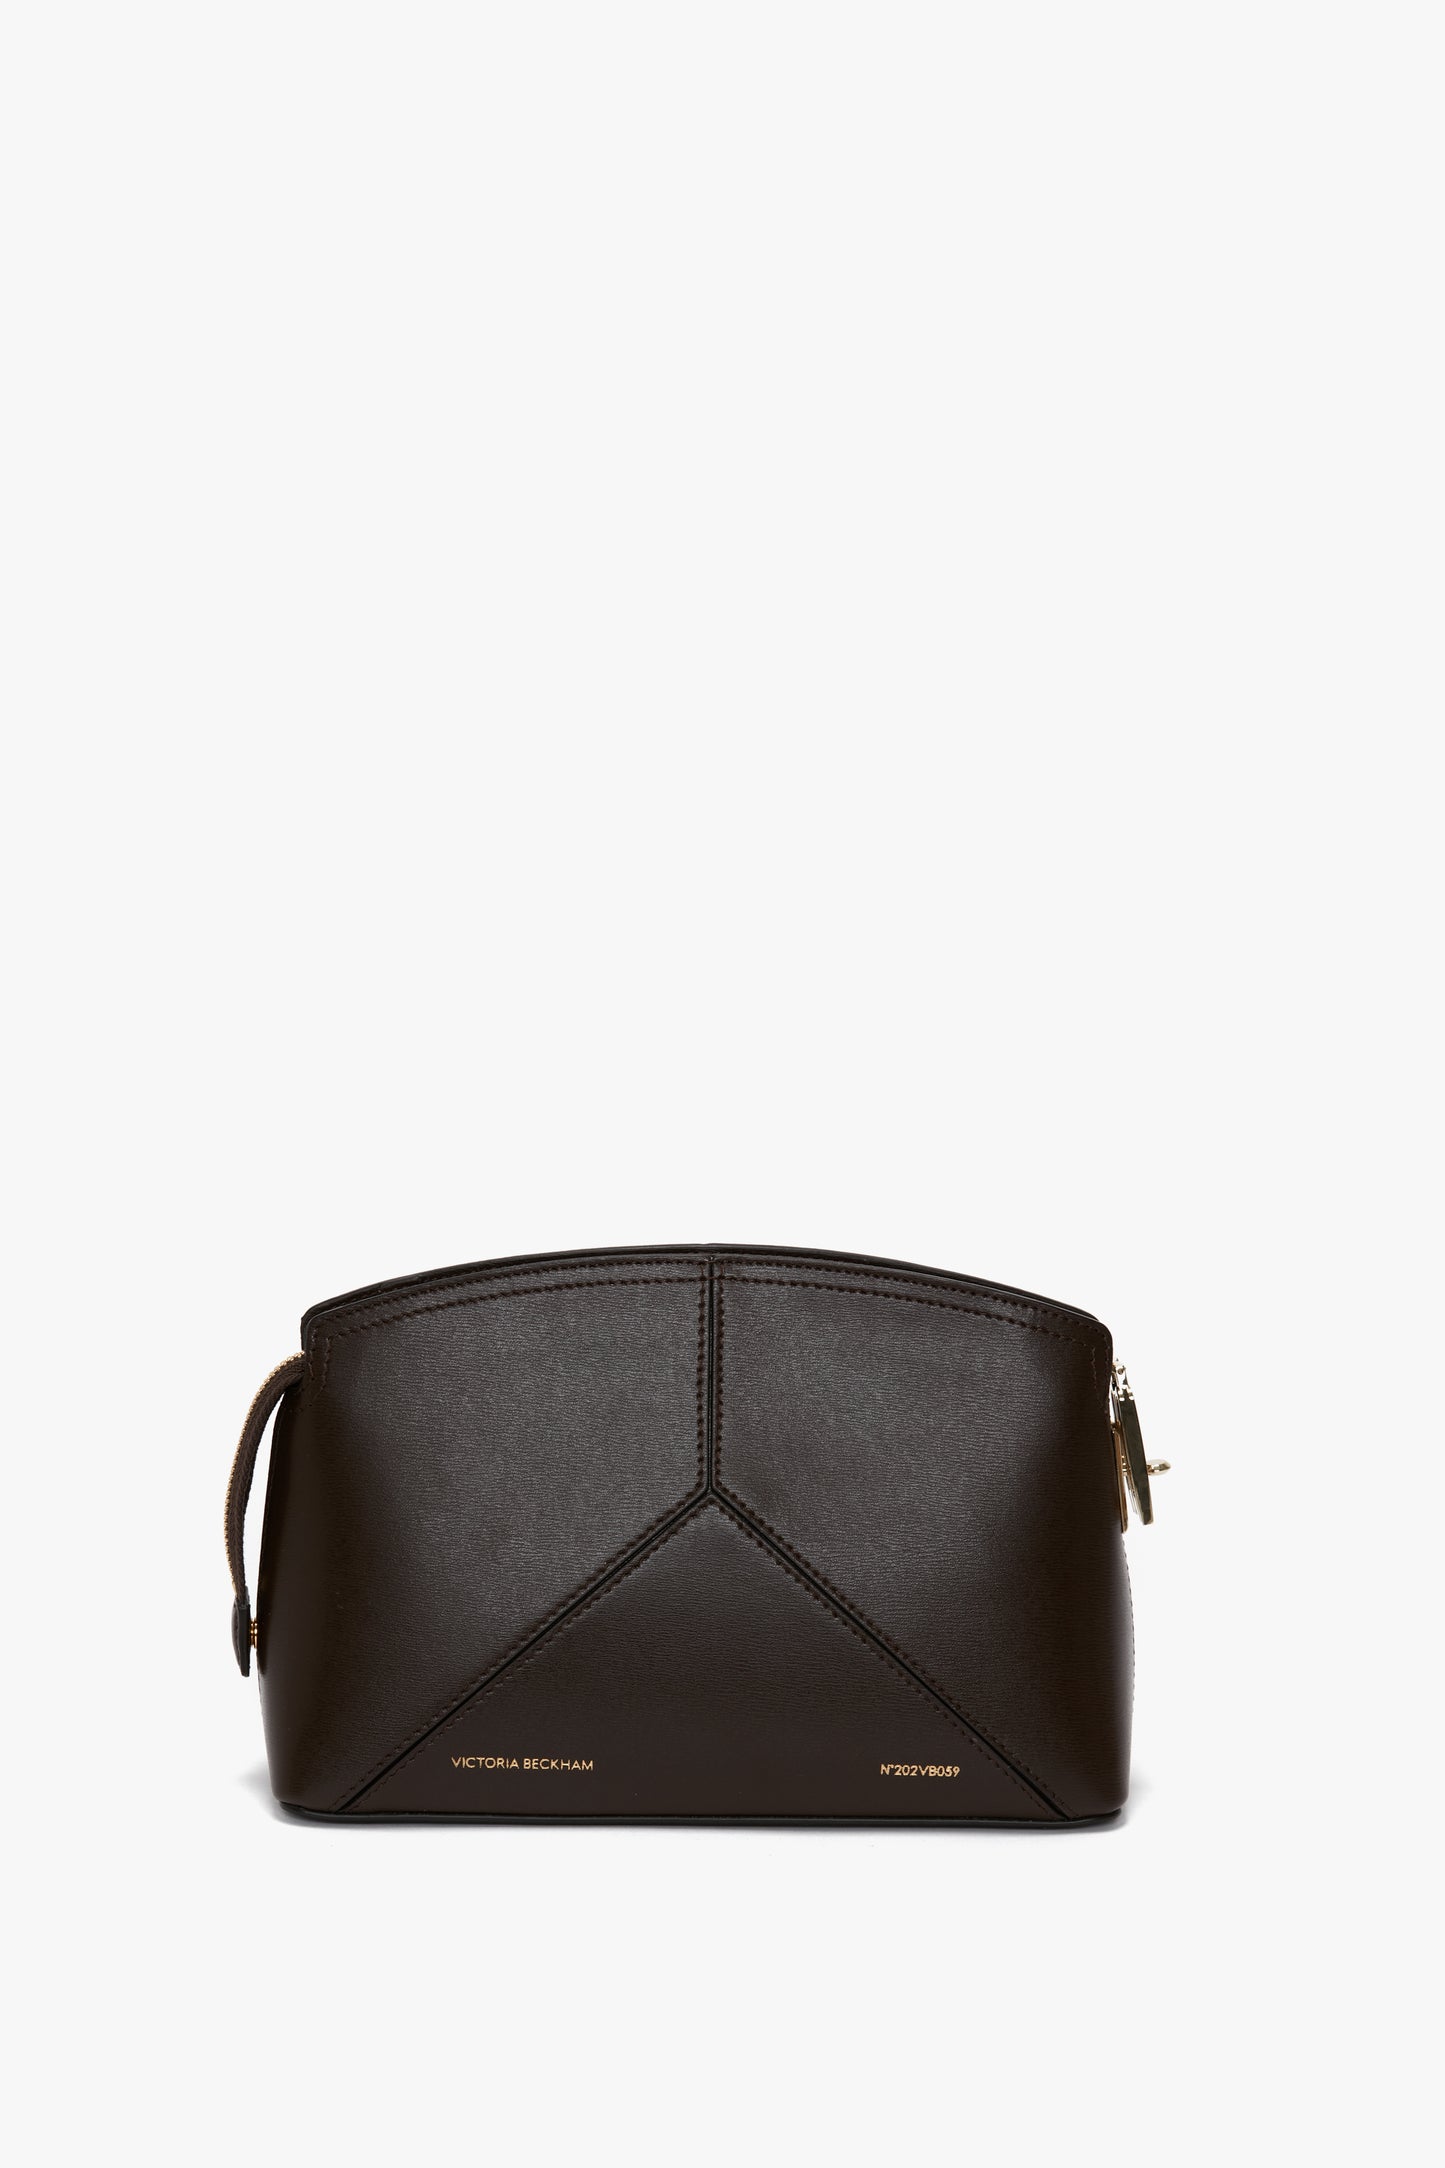 A sleek black Victoria Beckham Exclusive Victoria Crossbody Bag In Brown Leather crafted from calf leather with a geometric design and gold-lettered text near the bottom, on a white background.